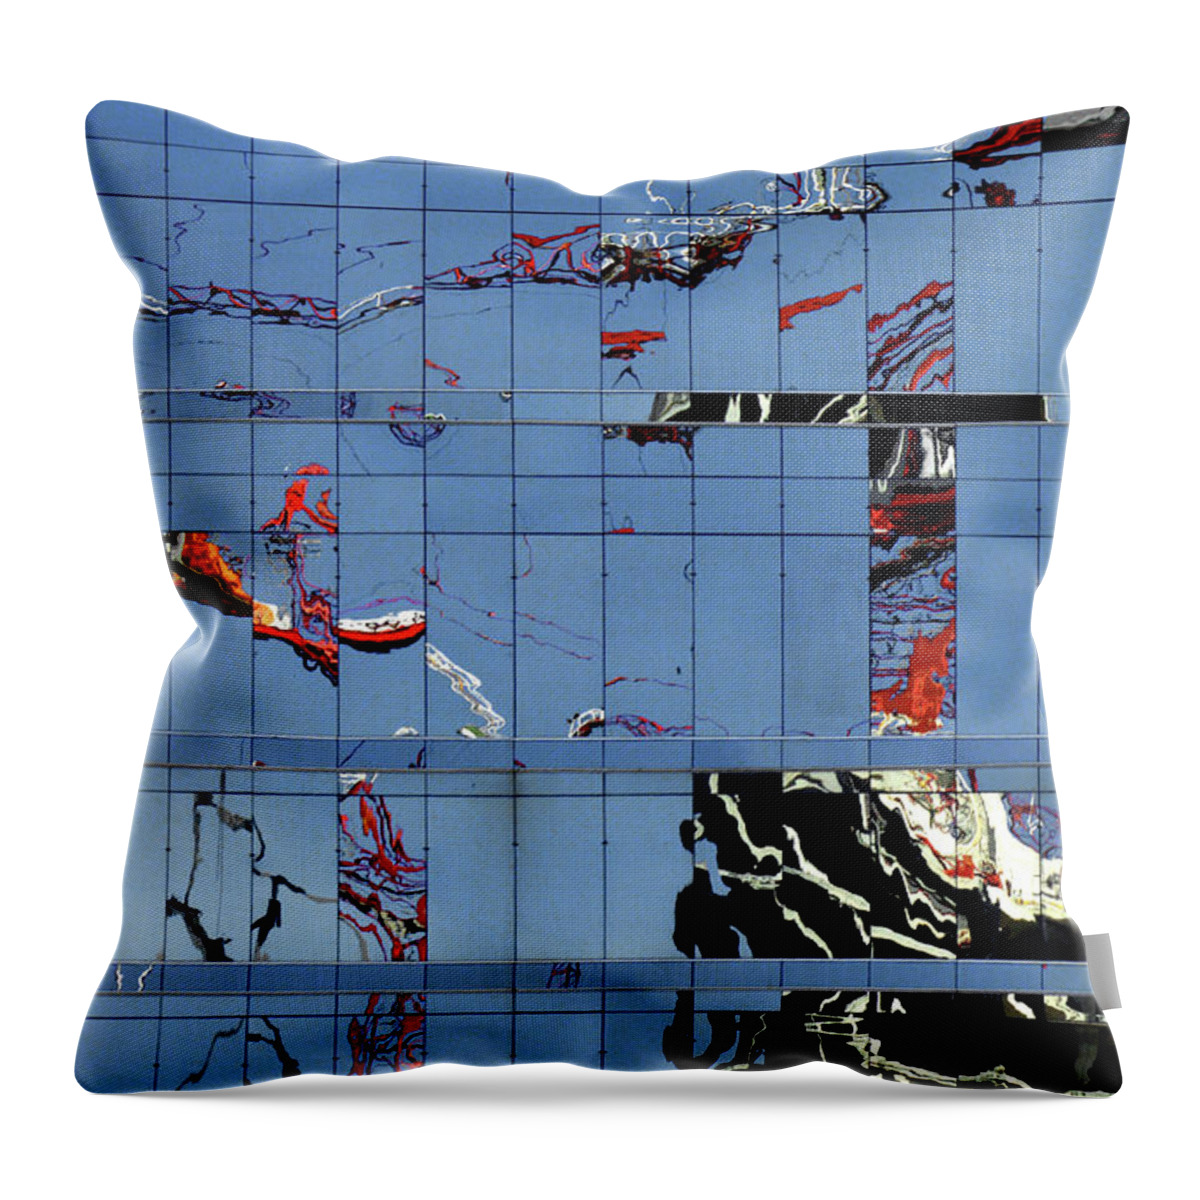 Urban Throw Pillow featuring the photograph Abstritecture 4 by Stuart Allen